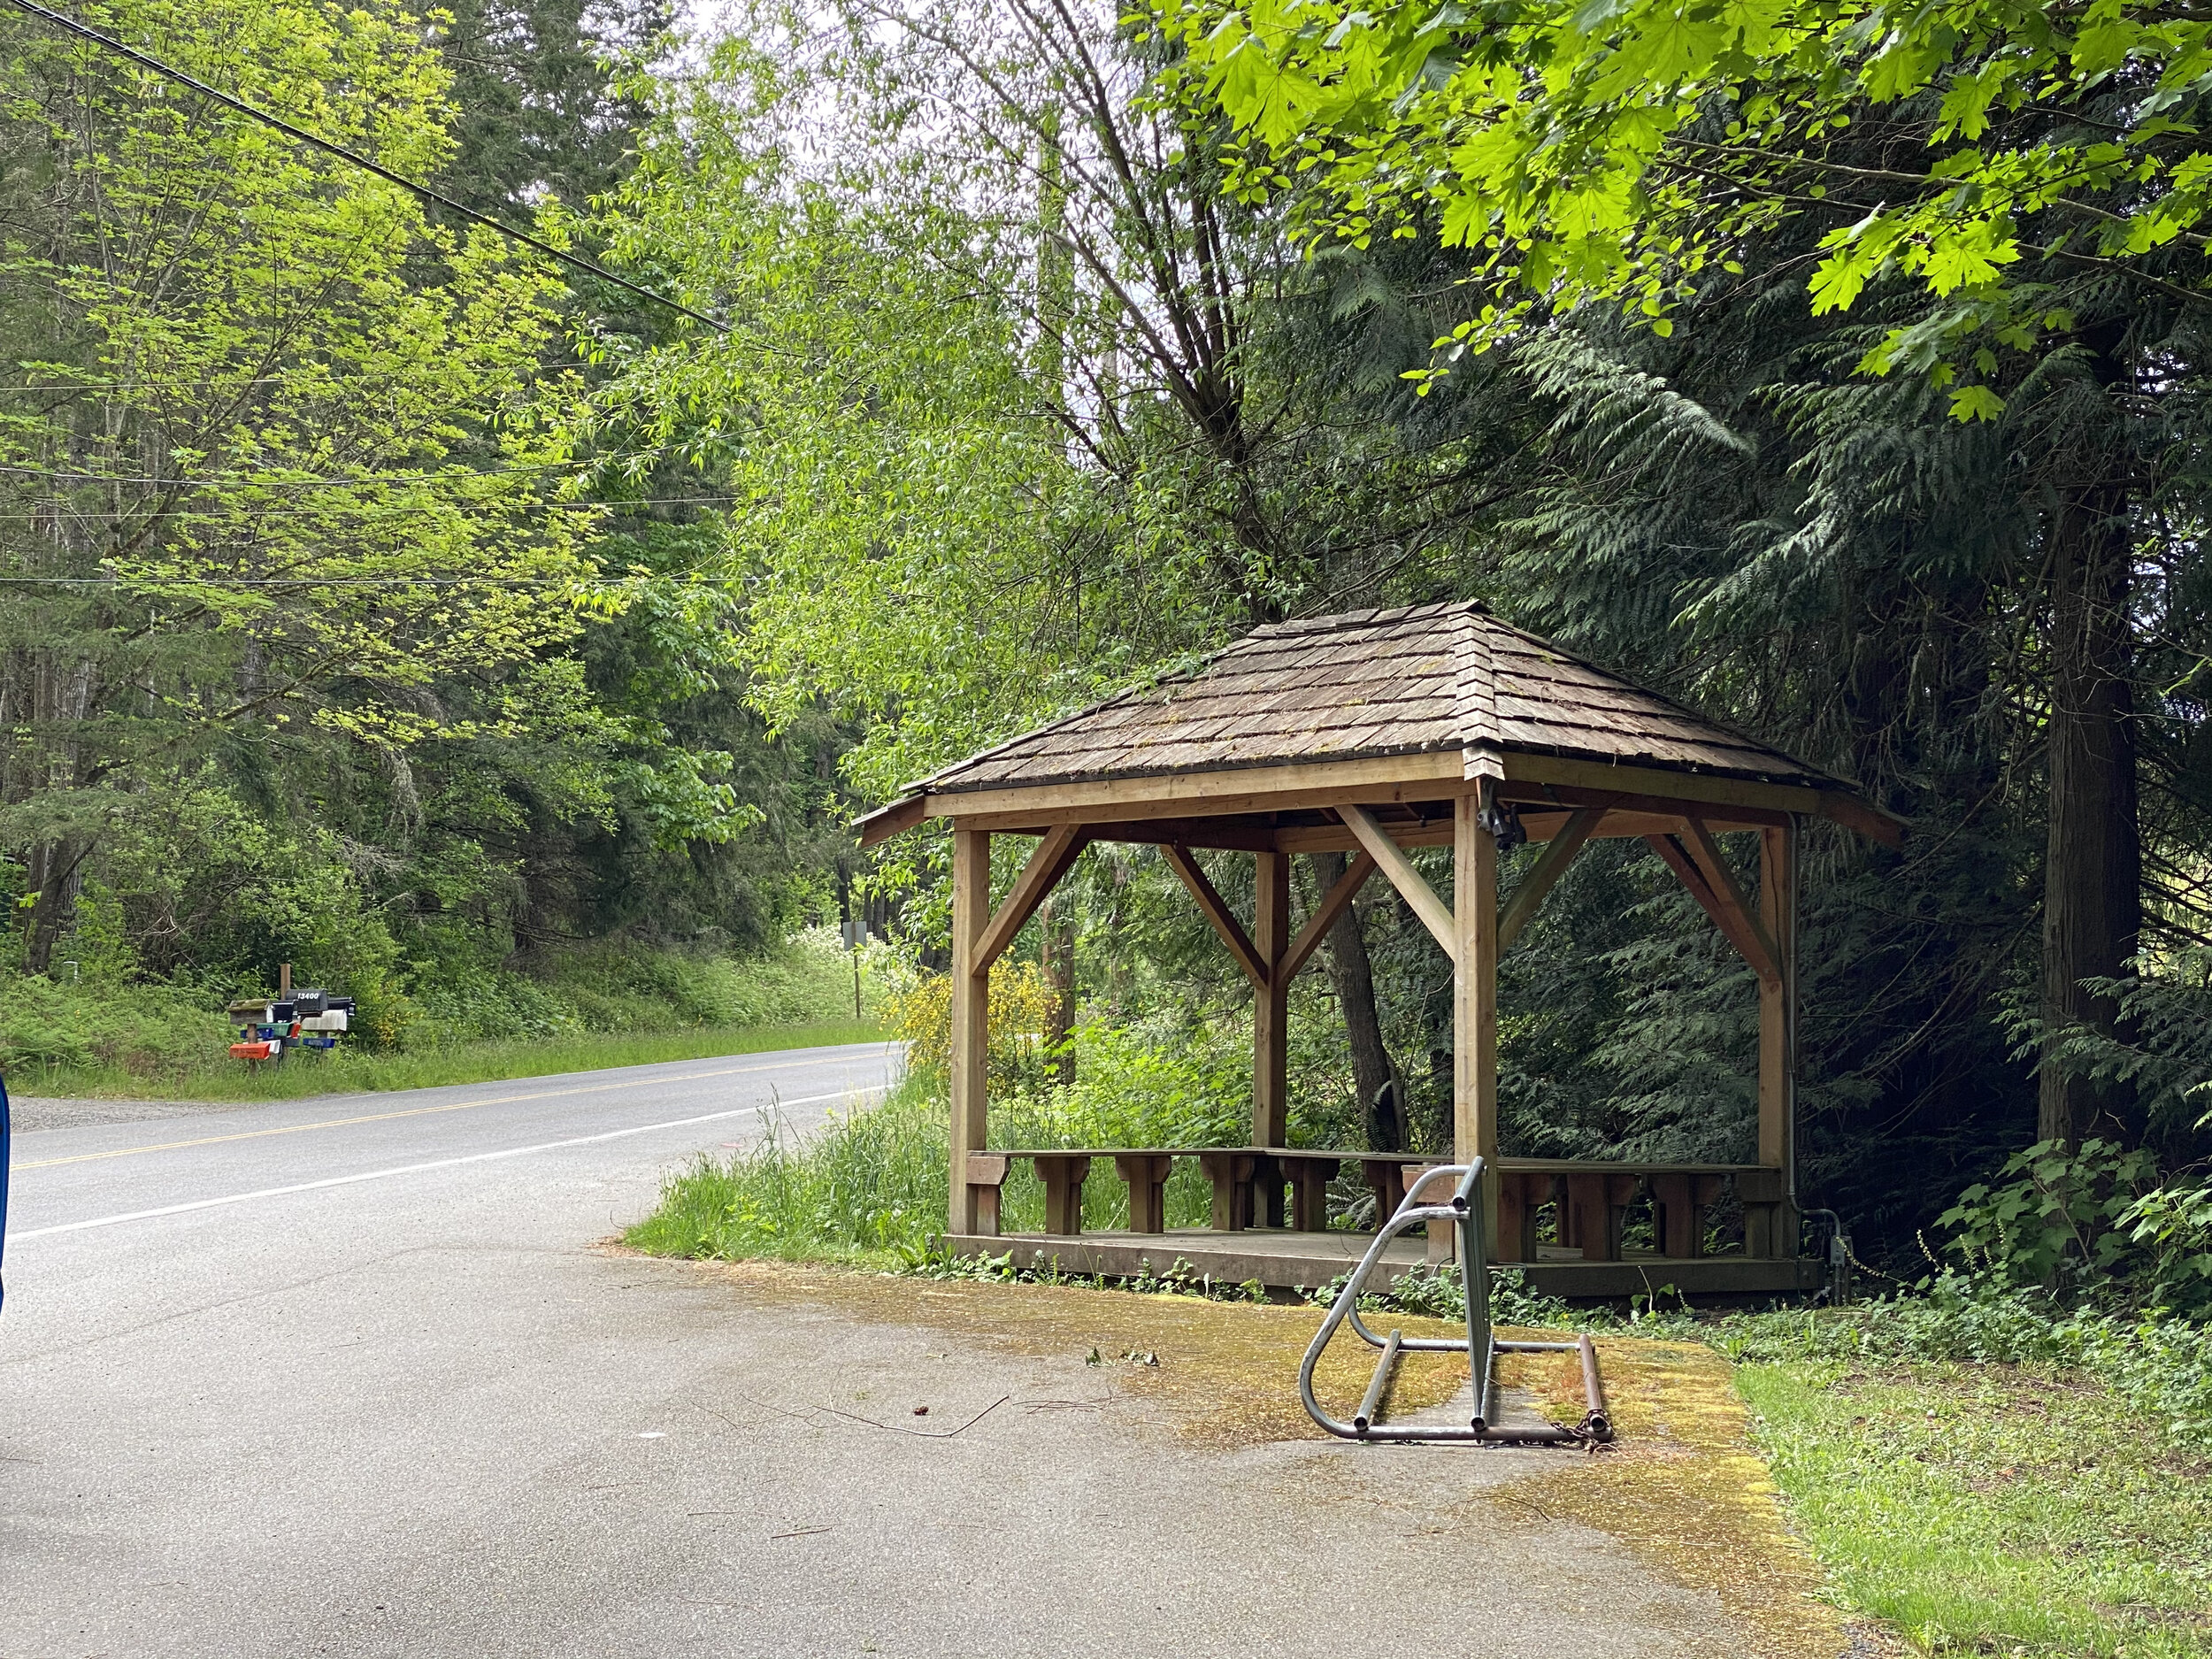  This covered bus stop with well-placed bike rack near the entrance to Hidden Cove Estates makes a natural community gathering spot during the school year. Kitsap Transit is timed to the ferry schedule during commuter hours, making it an easy trip in